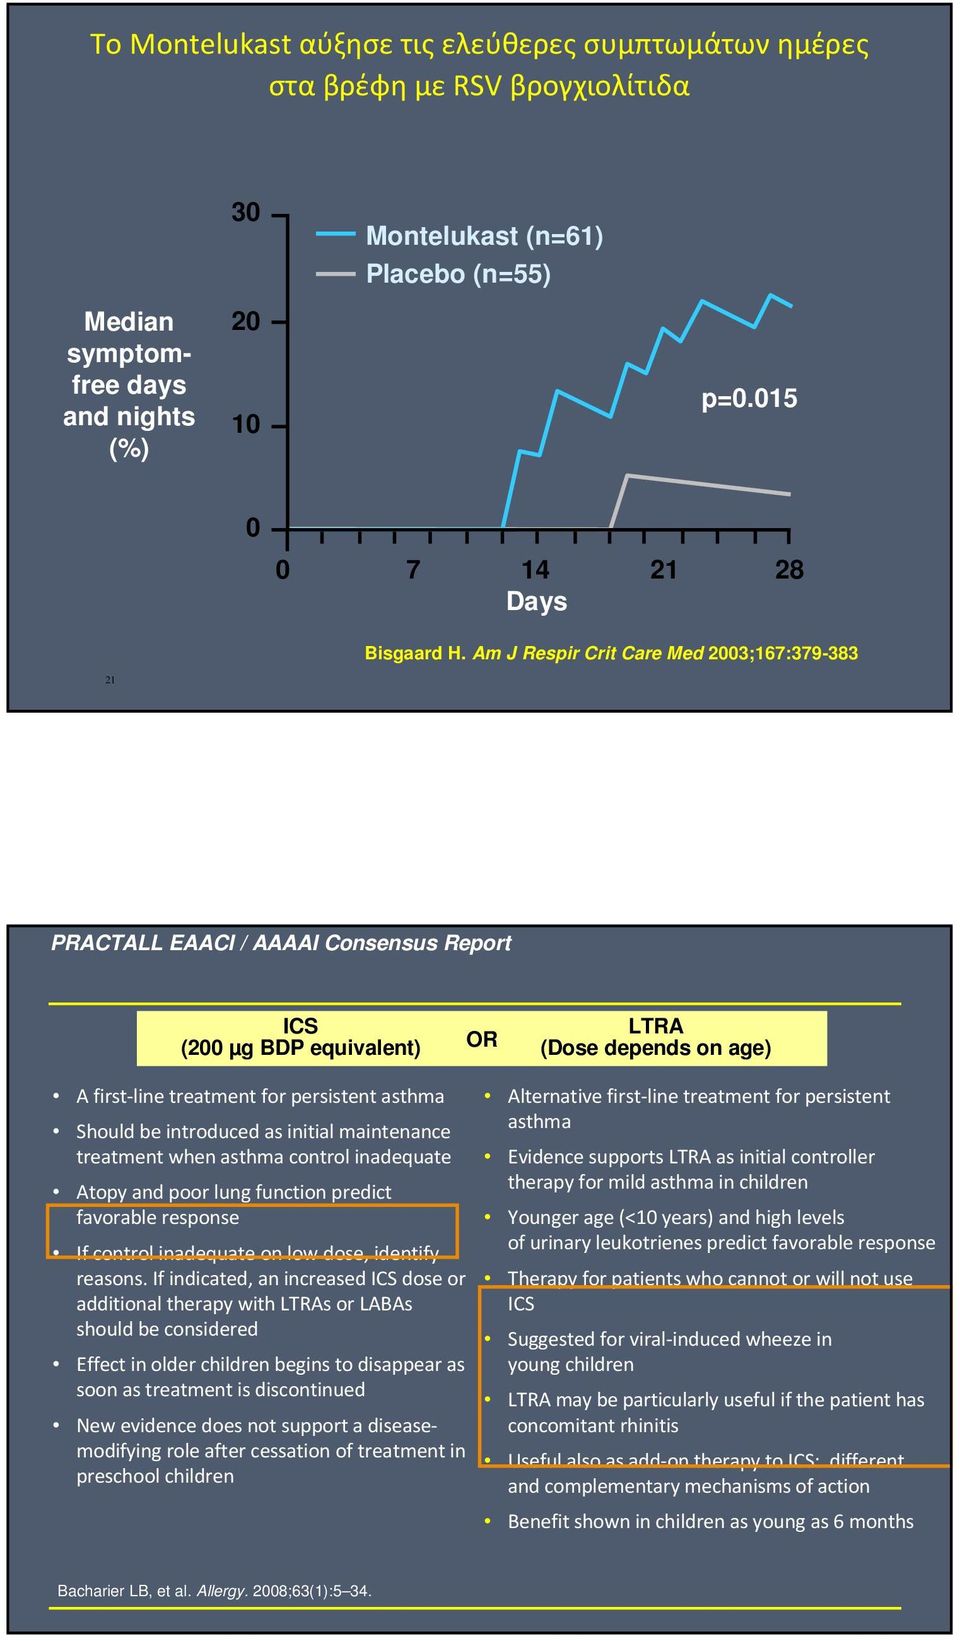 Am J Respir Crit Care Med 2003;167:379-383 21 PRACTALL EAACI / AAAAI Consensus Report ICS (200 µg BDP equivalent) OR LTRA (Dose depends on age) A first-line treatment for persistent asthma Should be